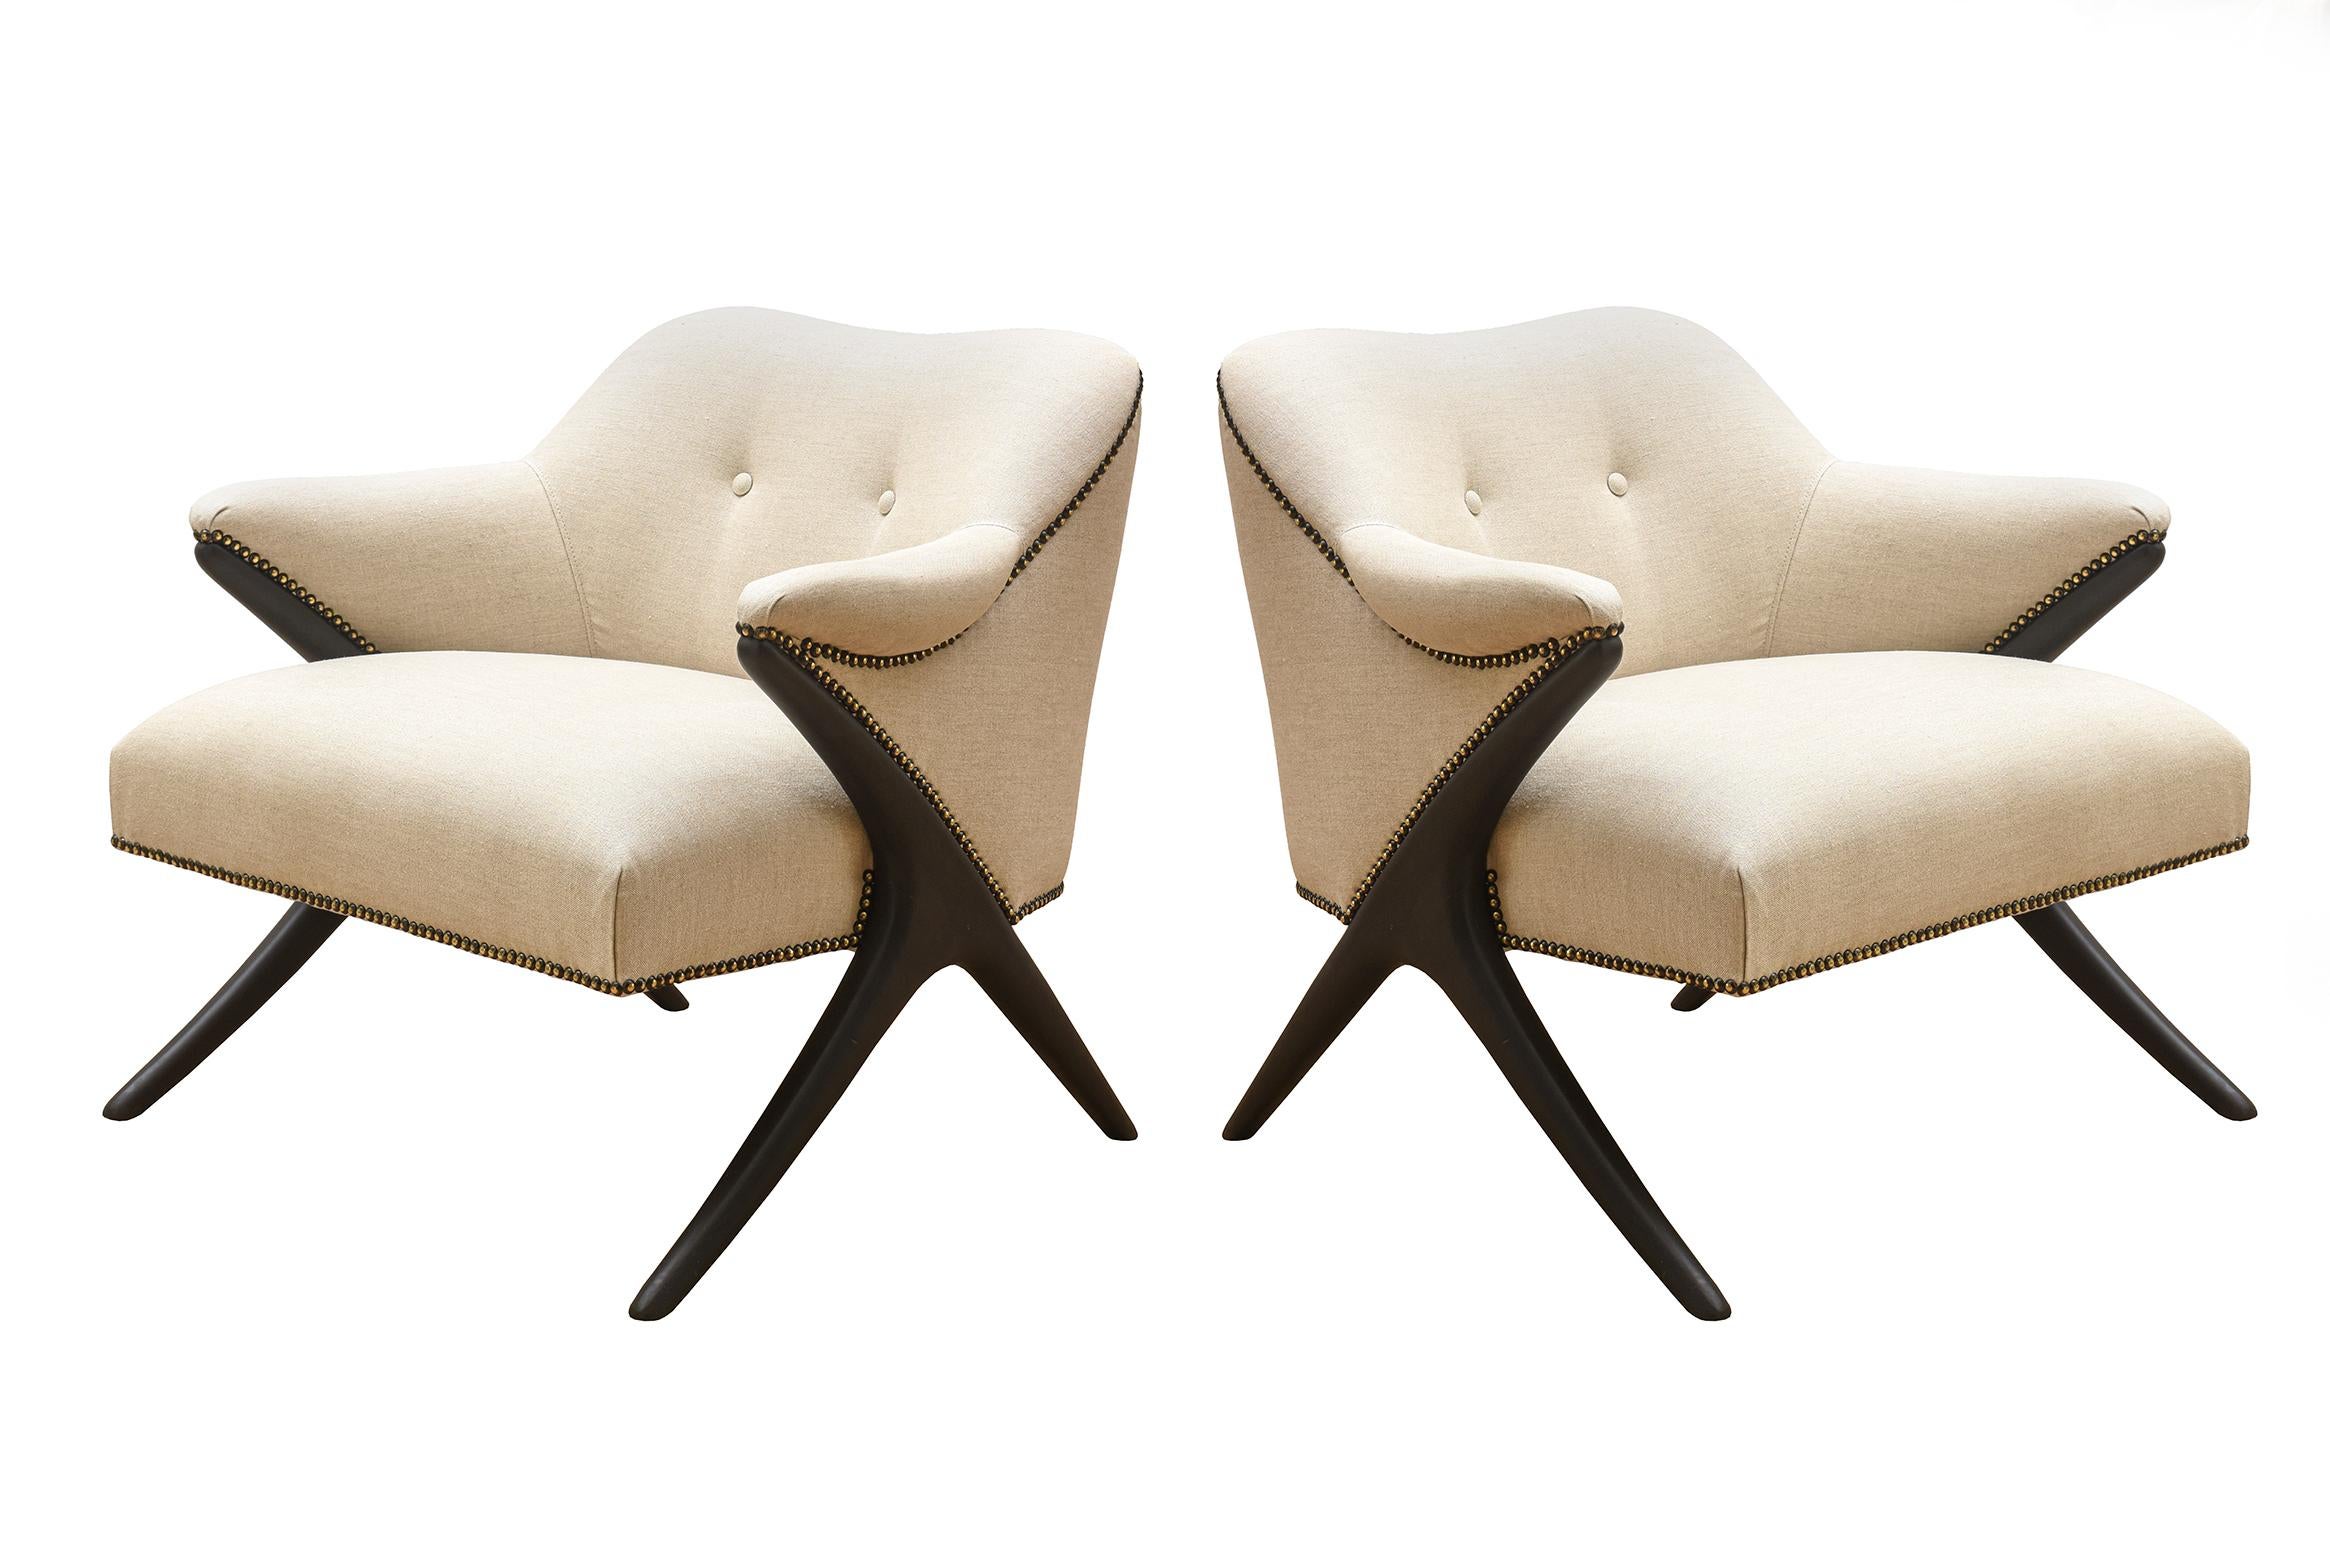 American Karpen of Ca. Ebonized and Upholstered Lounge Side Chairs Mid-Century Modern